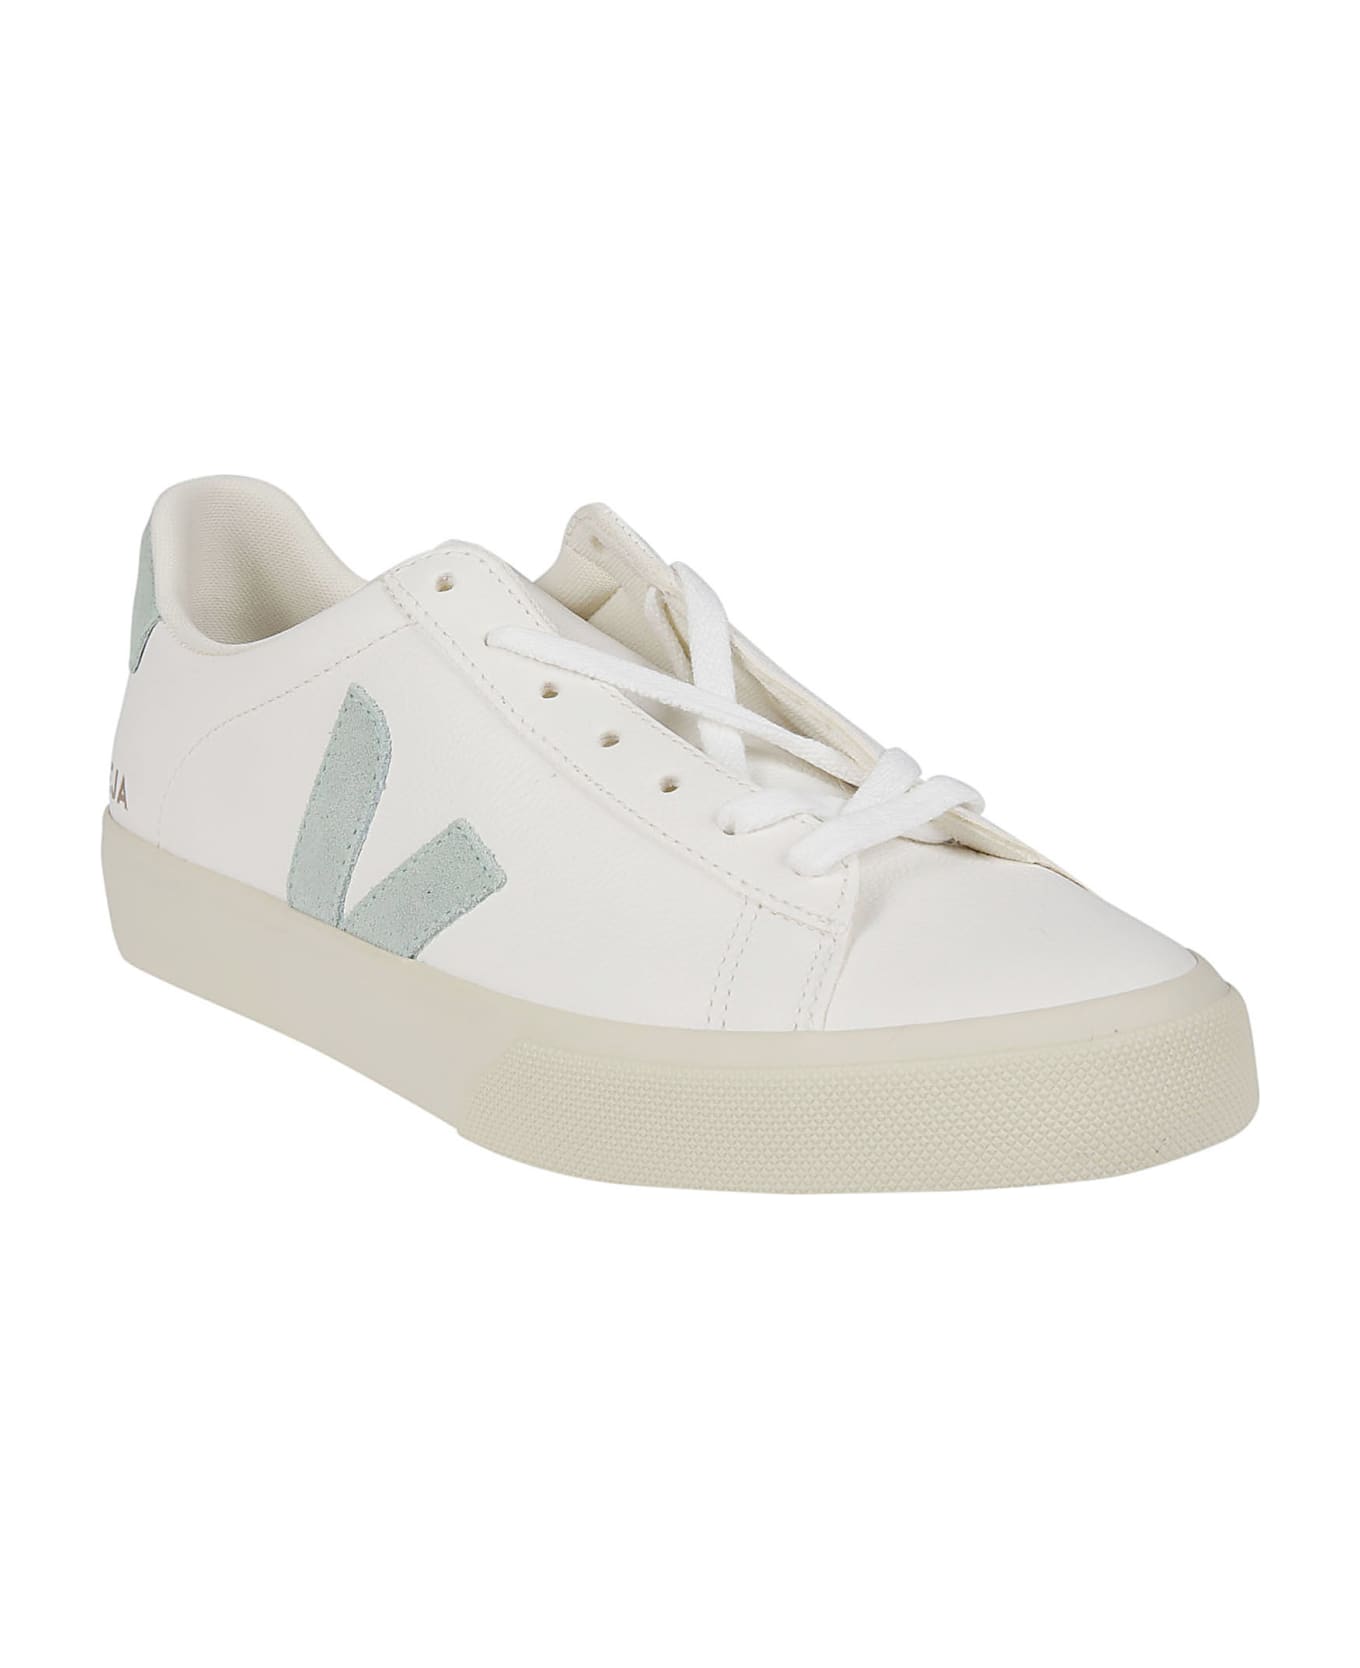 Veja Campo Sneakers - Extra White/macha スニーカー